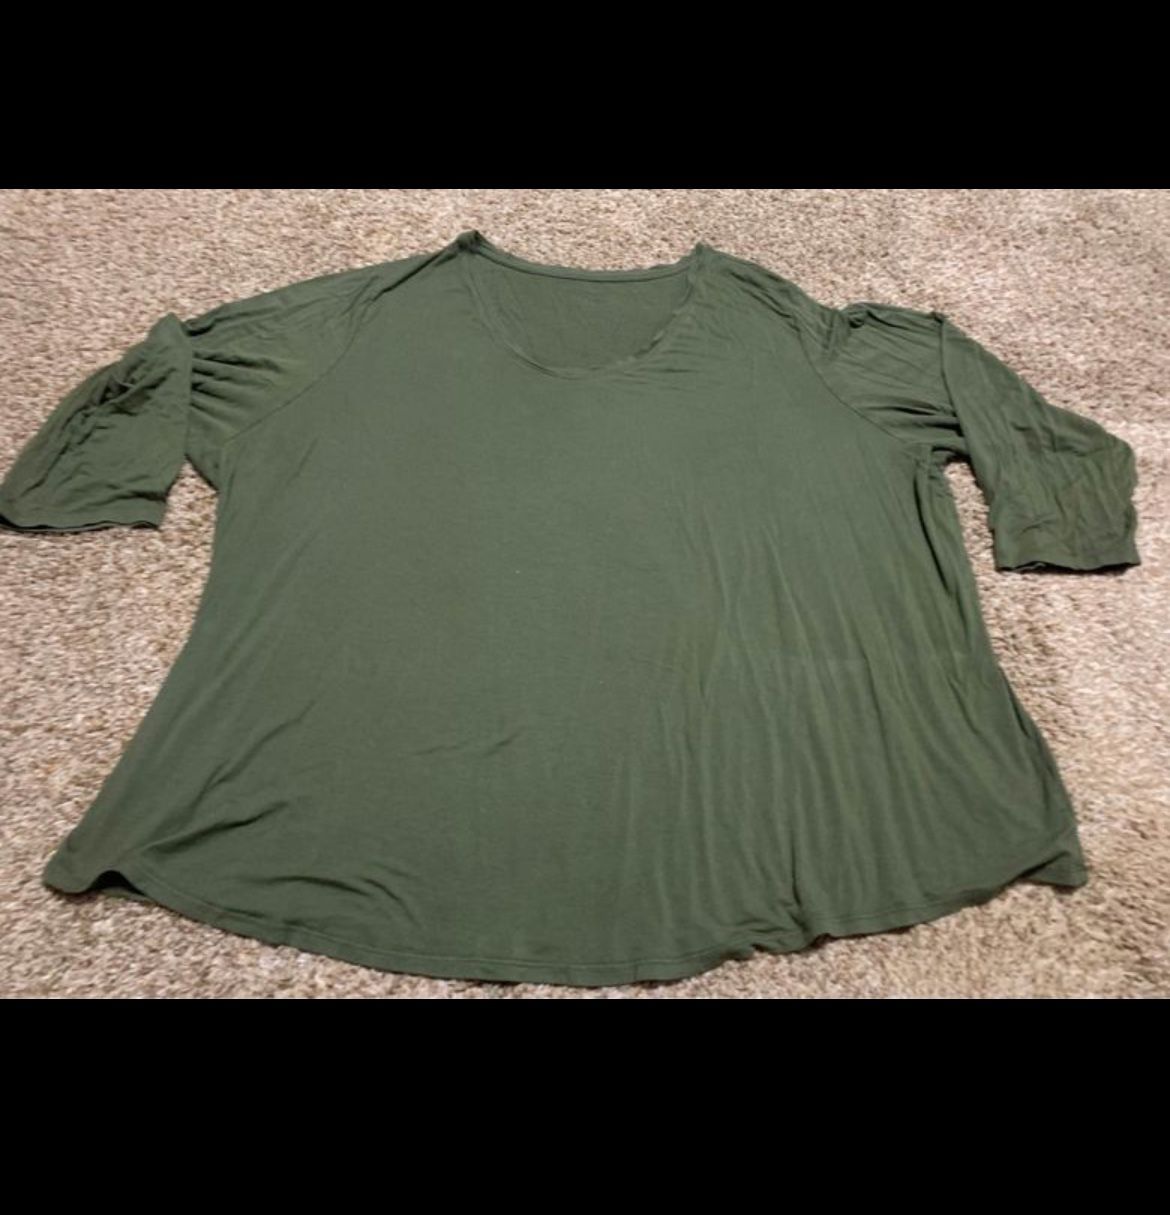 Olive green woman’s top size 5XL